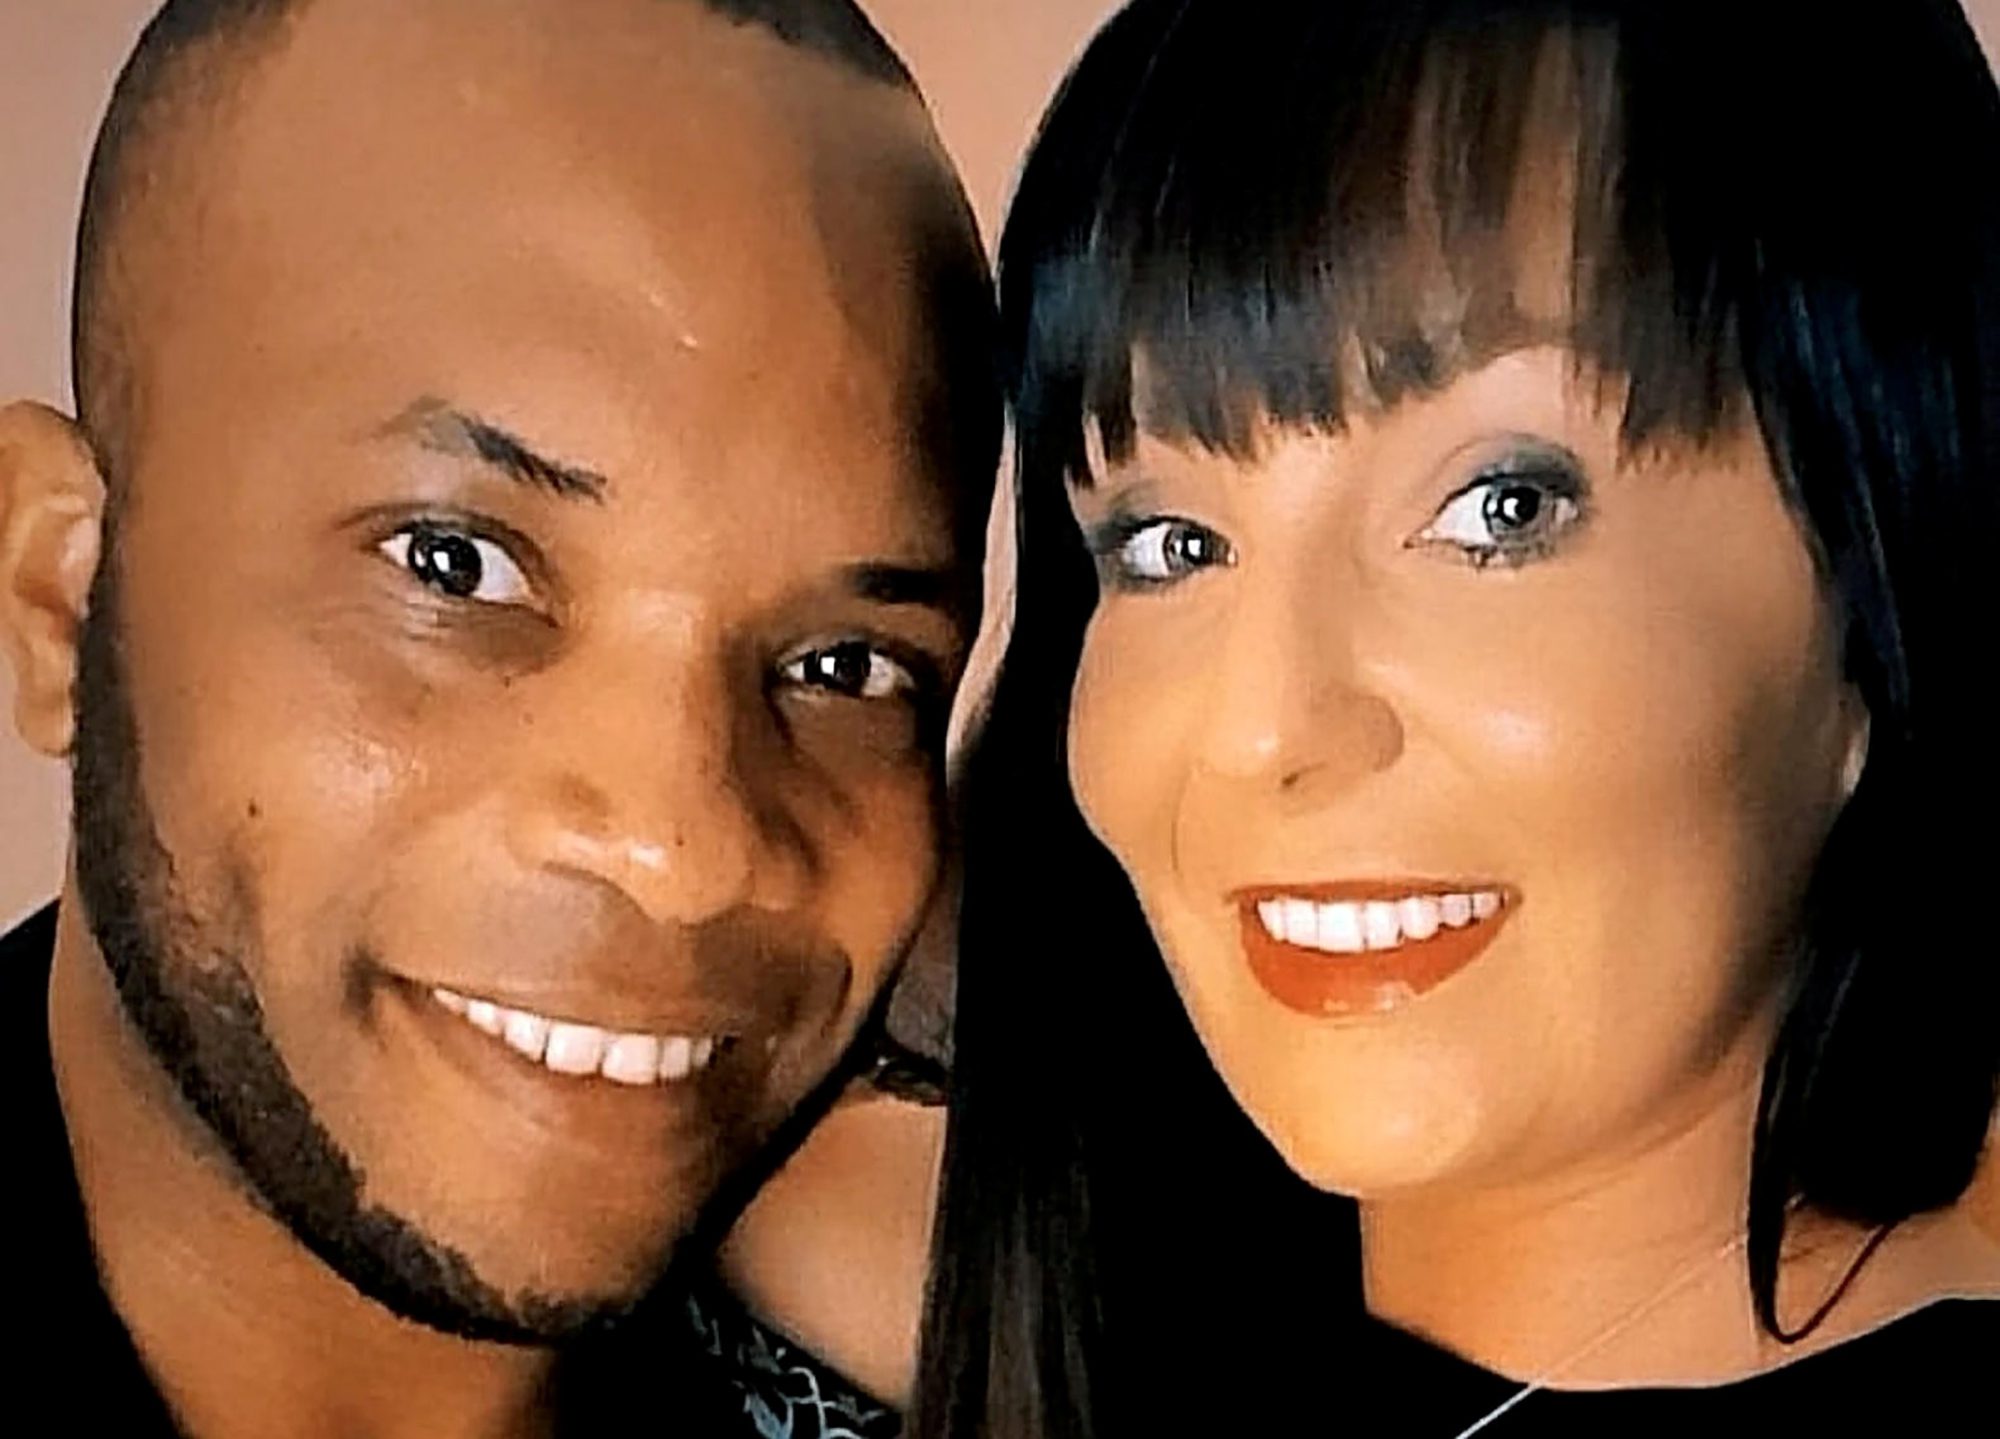 Vikki Brown and Lucas Martins in an undated photo. Vikki has revealed an unusual problem in her two-year-long relationship – her boyfriend gets up to 100 erections per day. (Vikki Brown,SWNS/Zenger)